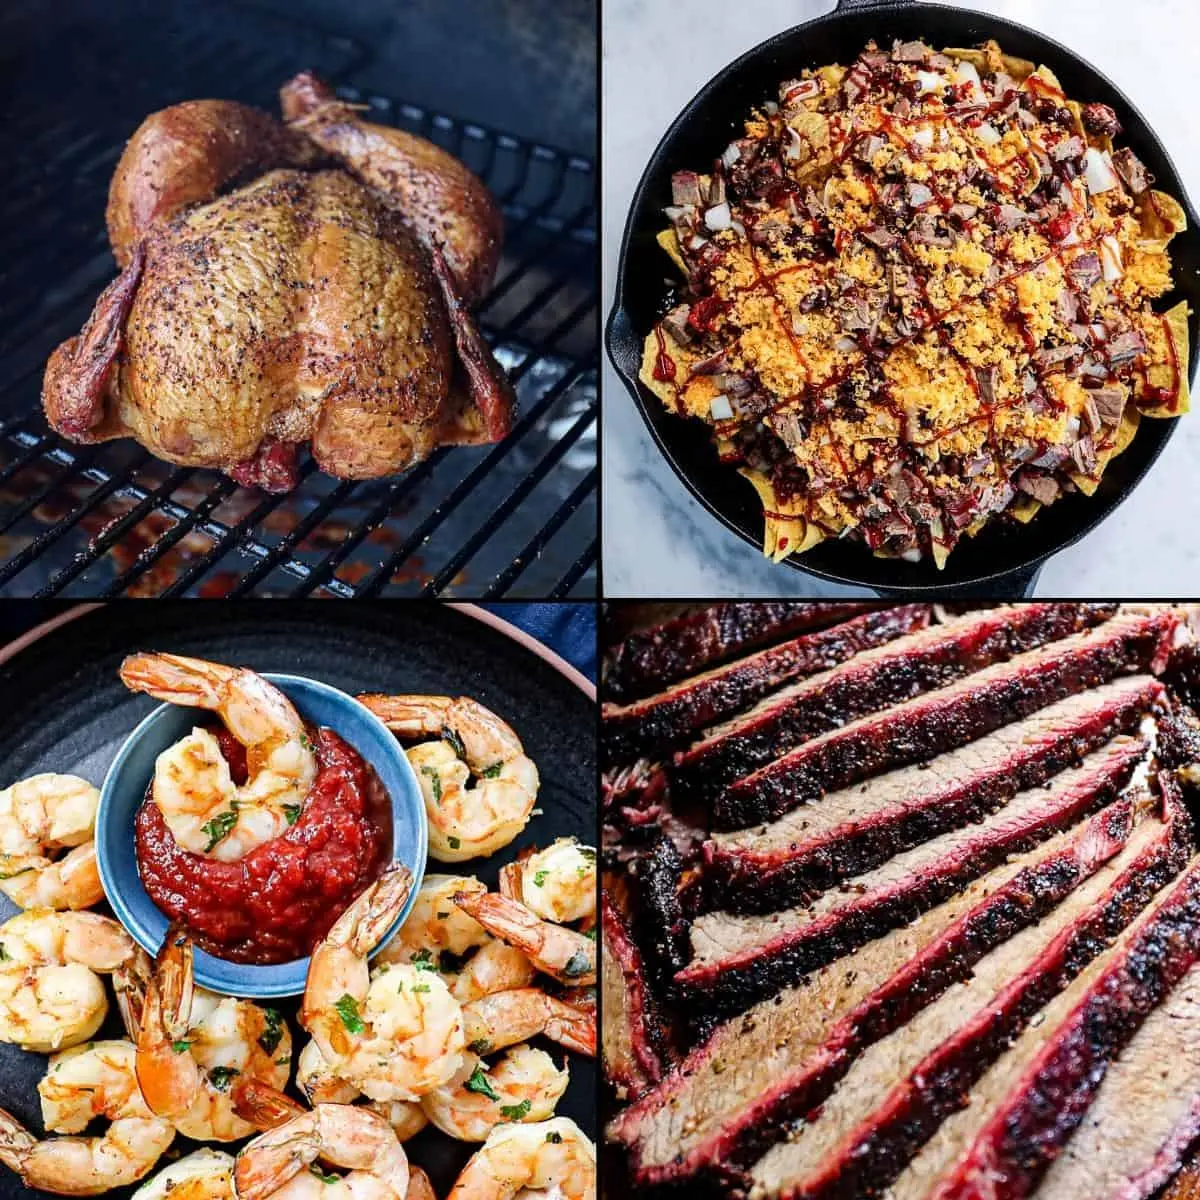 traeger smoked recipes - Why is Traeger smoking so much